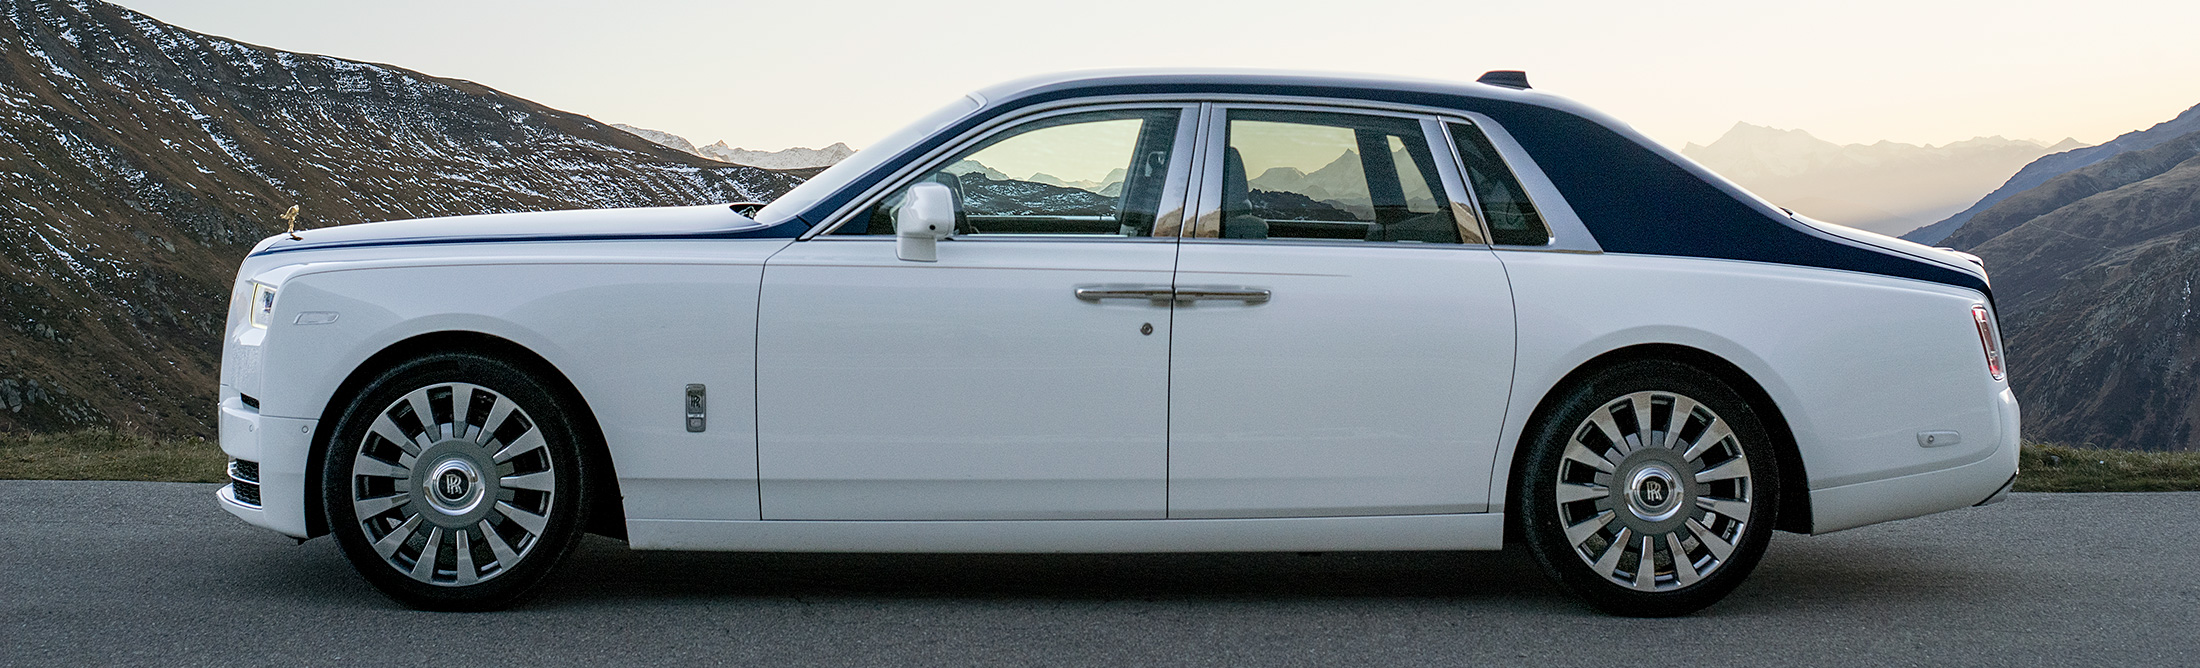 Here's the Most Exclusive Rolls-Royce Phantom Delivered to a US Customer Yet